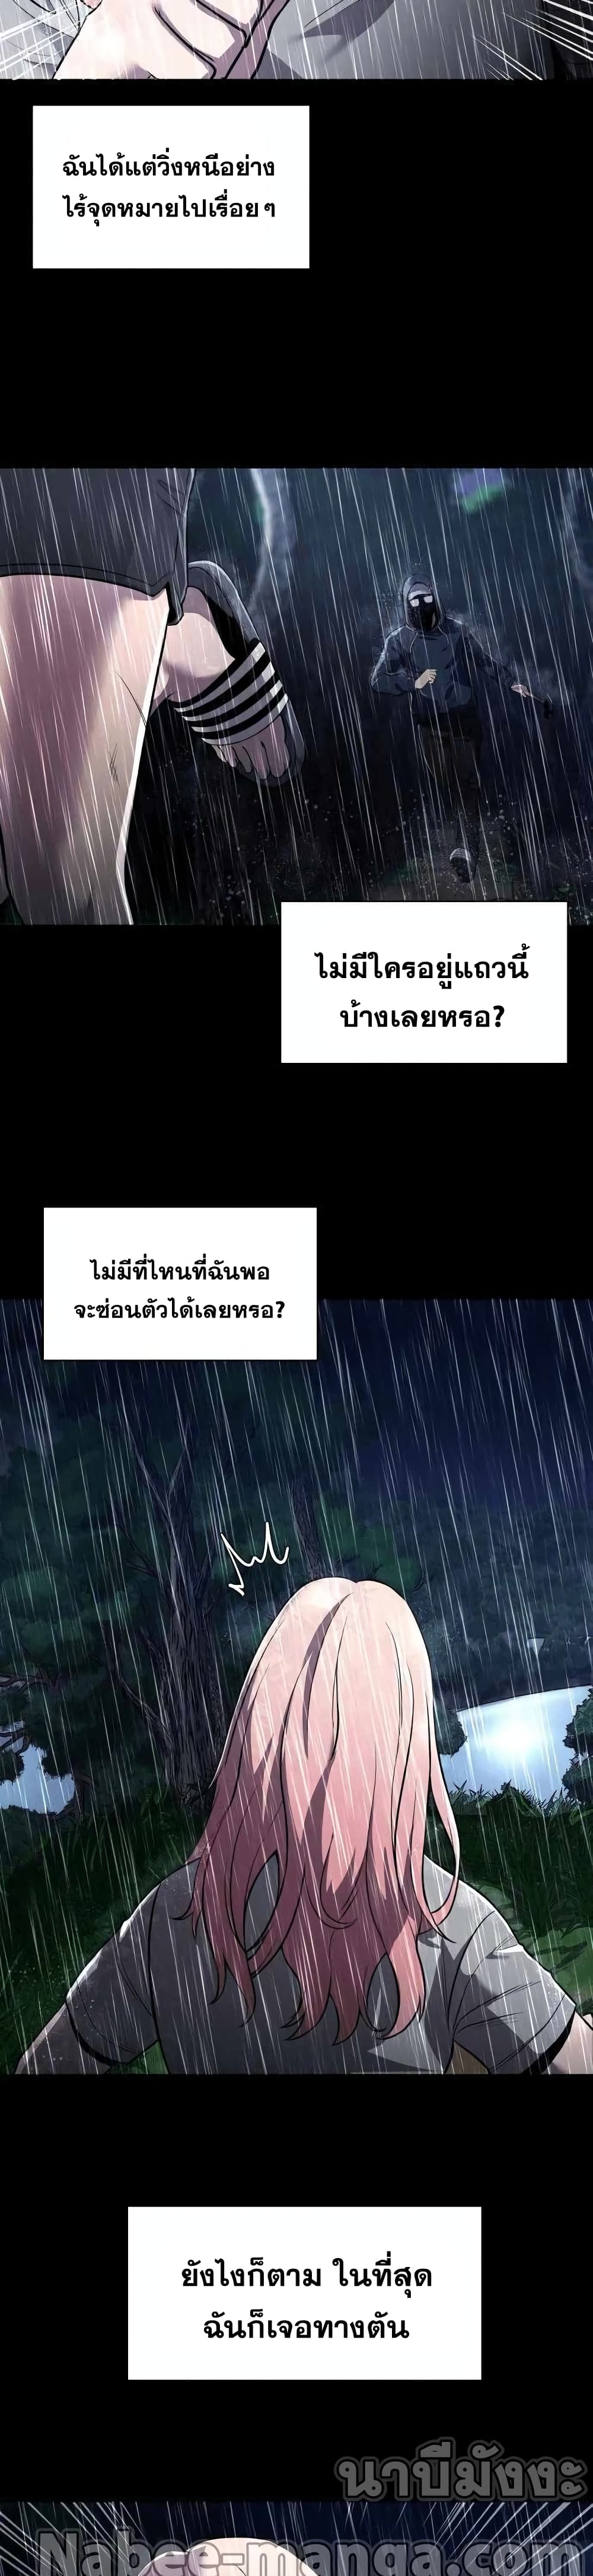 Surviving As a Fish ตอนที่ 10 (3)